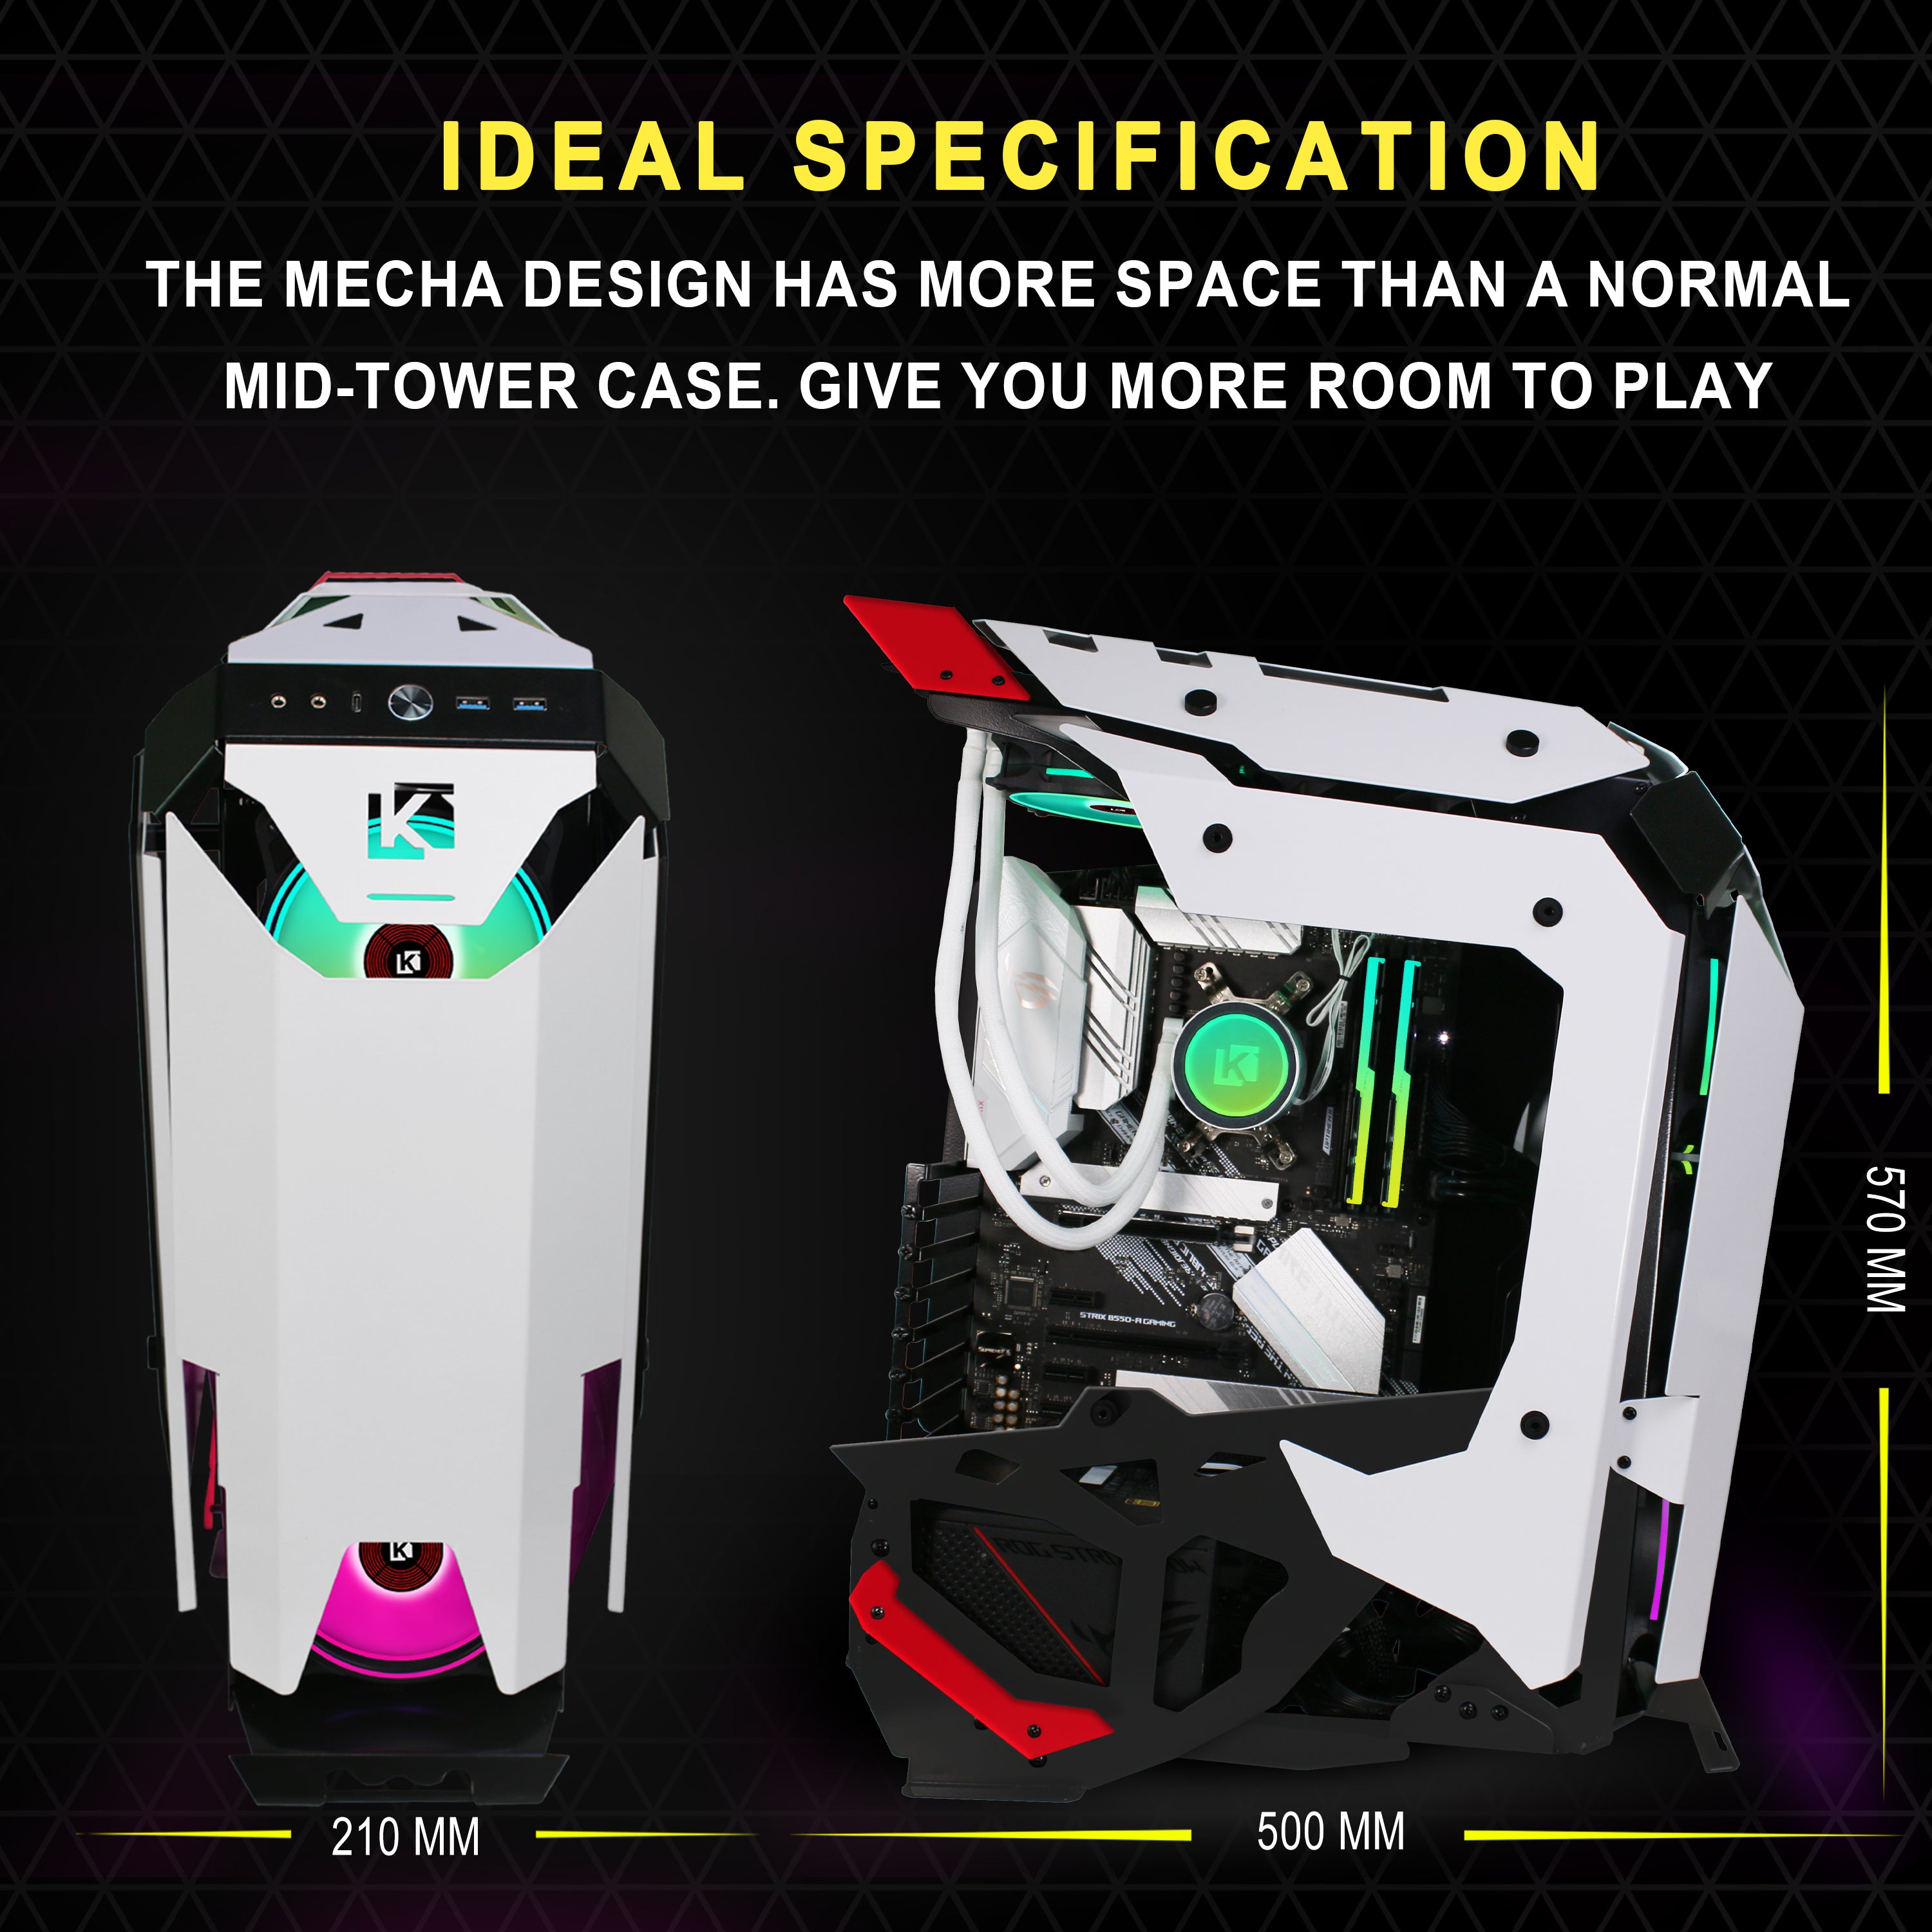 KEDIERS C650 Mech PC Case - ATX Tower Gaming Computer Case with Tempered Glass,White